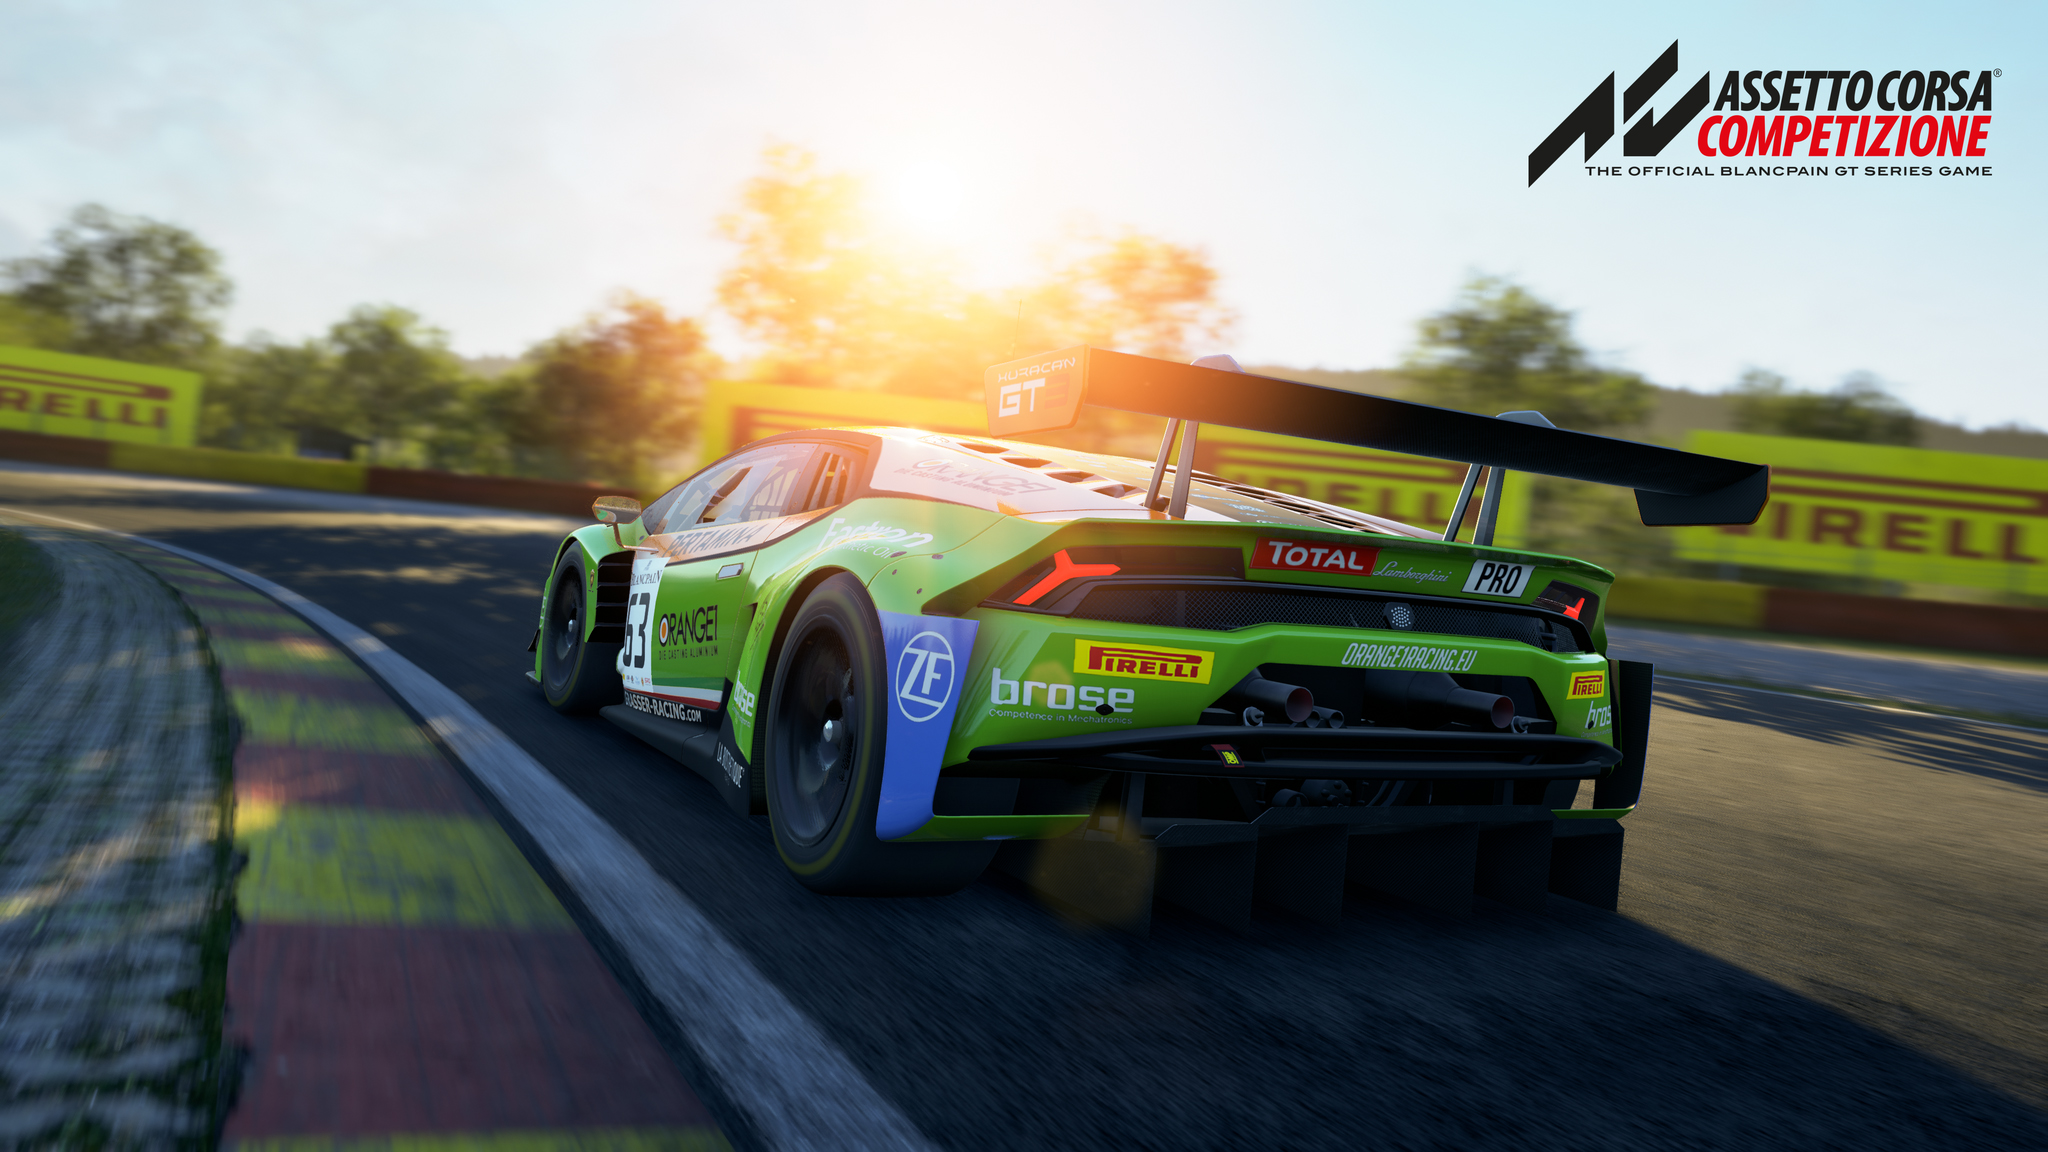 Assetto Corsa Competizione to host official Blancpain GT esports race - Team VVV